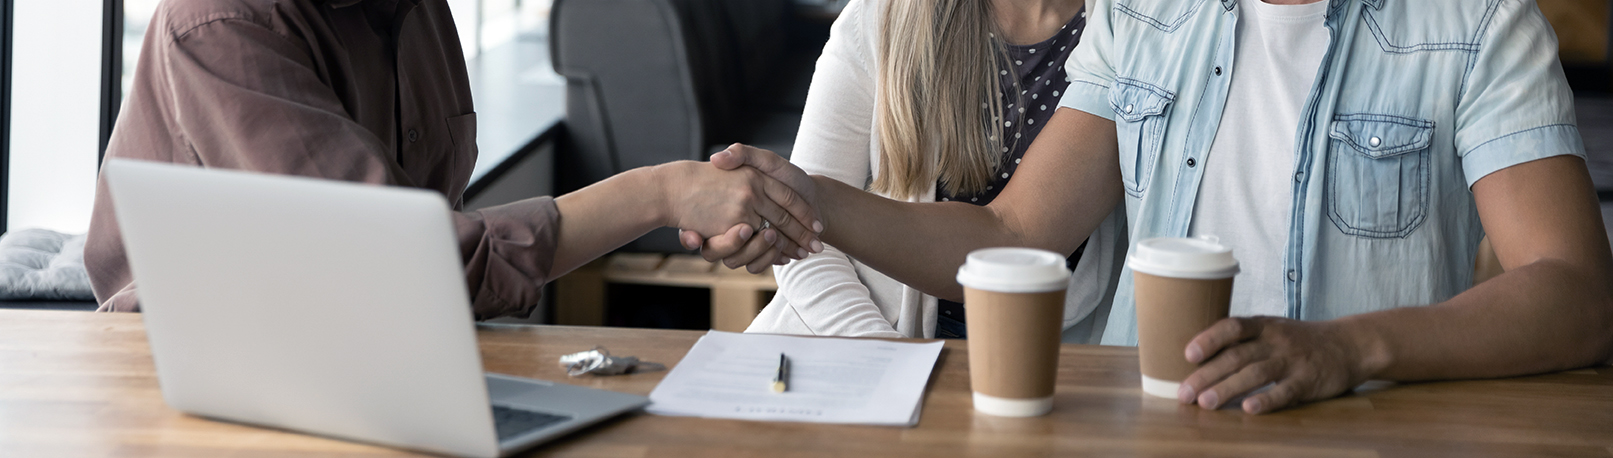 Professional skilled female financial advisor or real estate agent shaking hands with satisfied young couple clients, making agreement after negotiating contract terms at meeting in modern office.